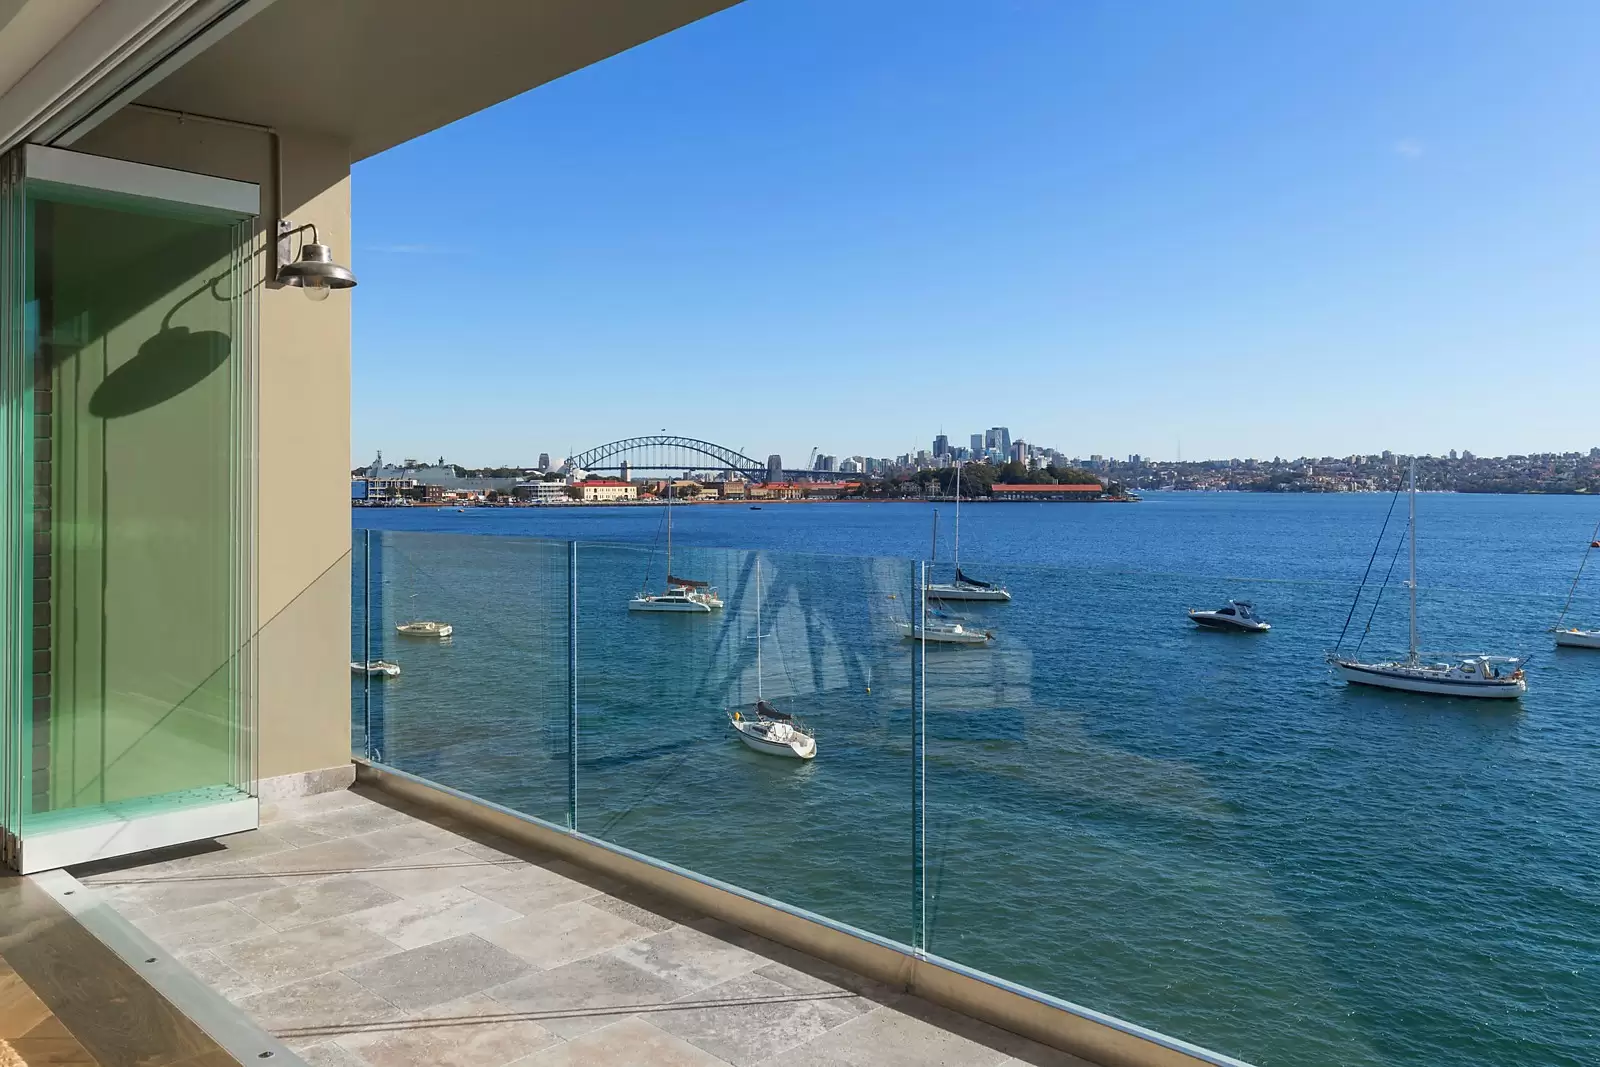 Photo #16: 19/85 Yarranabbe Road, Darling Point - Sold by Sydney Sotheby's International Realty